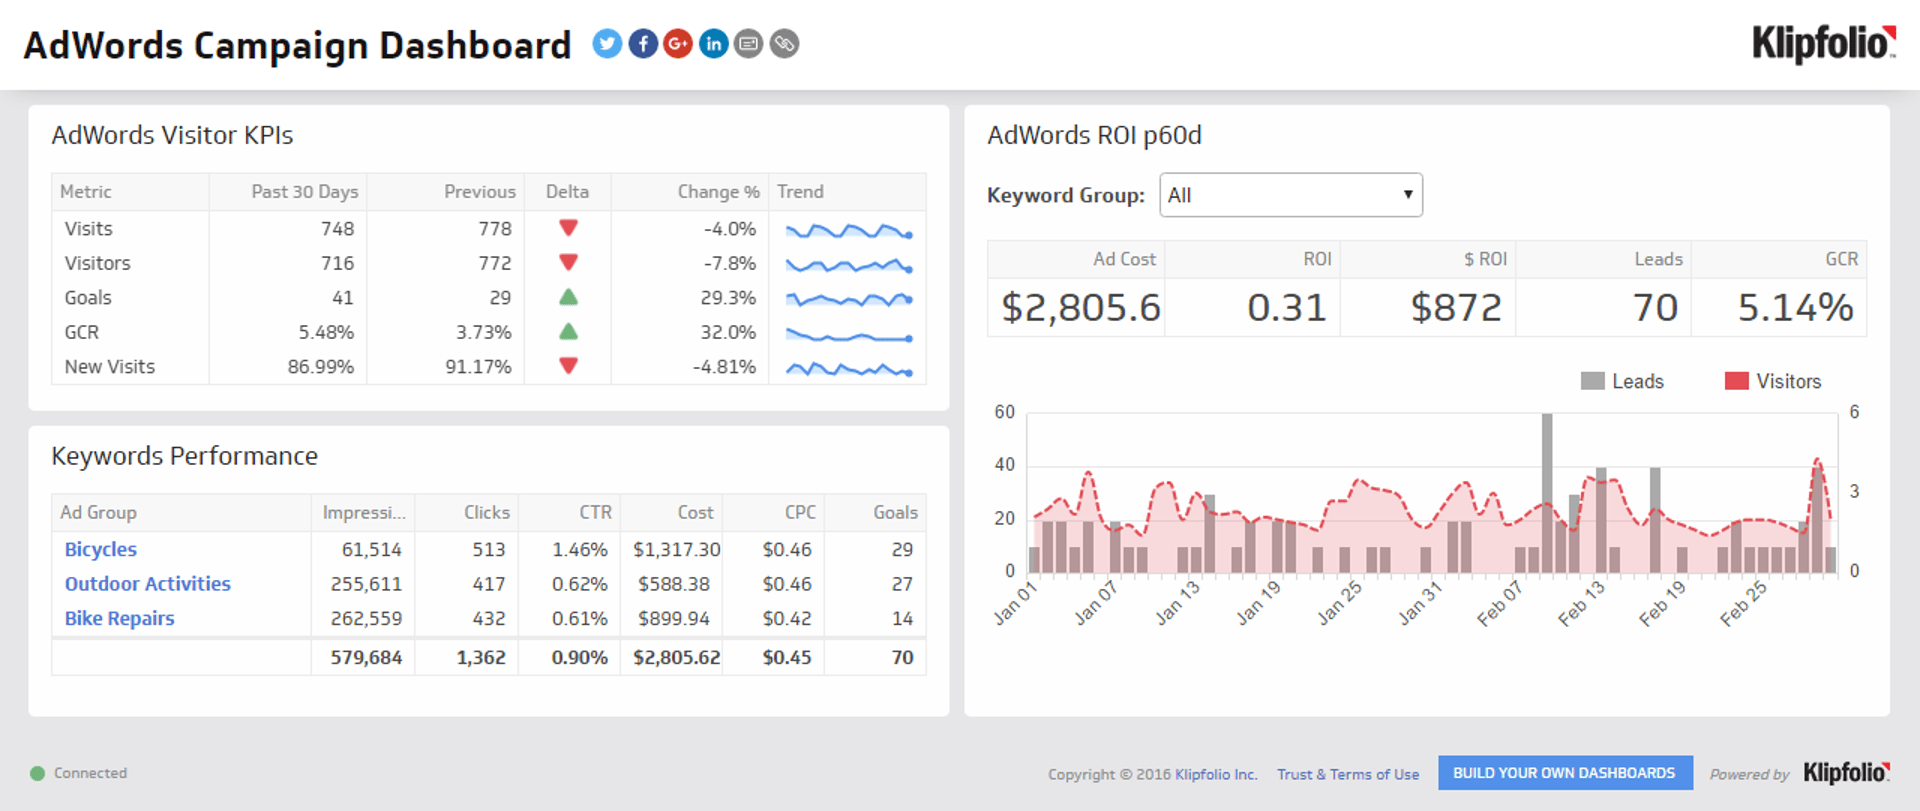 Marketing Dashboard Examples - AdWords Campaign Dashboard